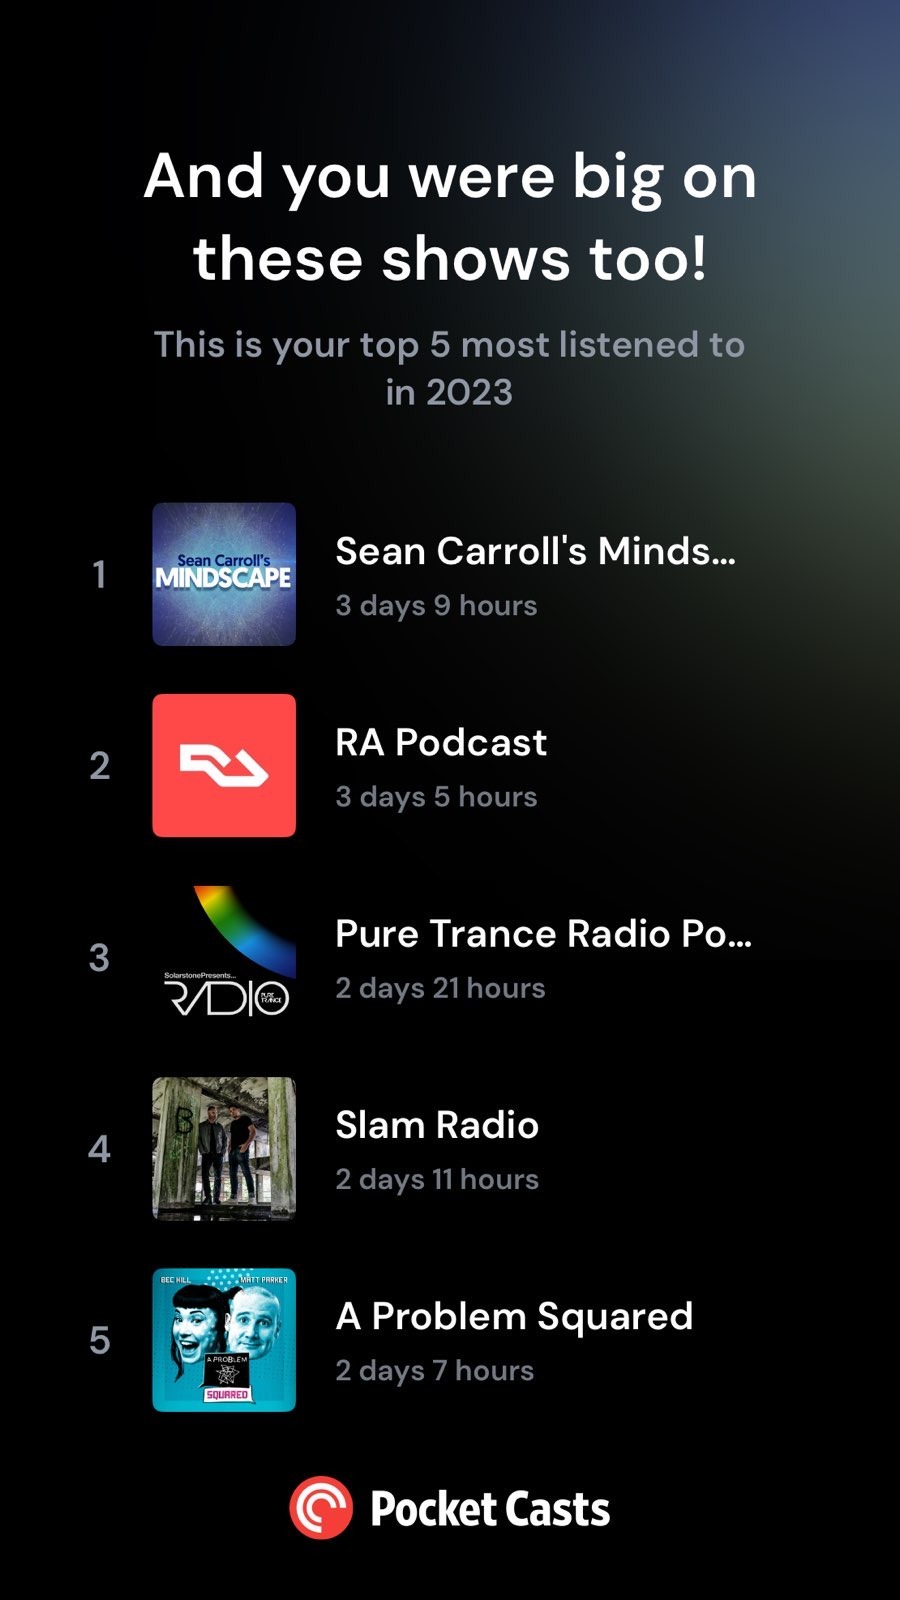 And you were big on these shows too!

1. Sean Carroll's Mindscape (3 days 9 hours)
2. RA Podcast (3 days 5 hours)
3. Pure Trance Radio Podcast (2 days 21 hours)
4. Slam Radio (2 days 11 hours)
5. A Problem Squared (2 days 7 hours)